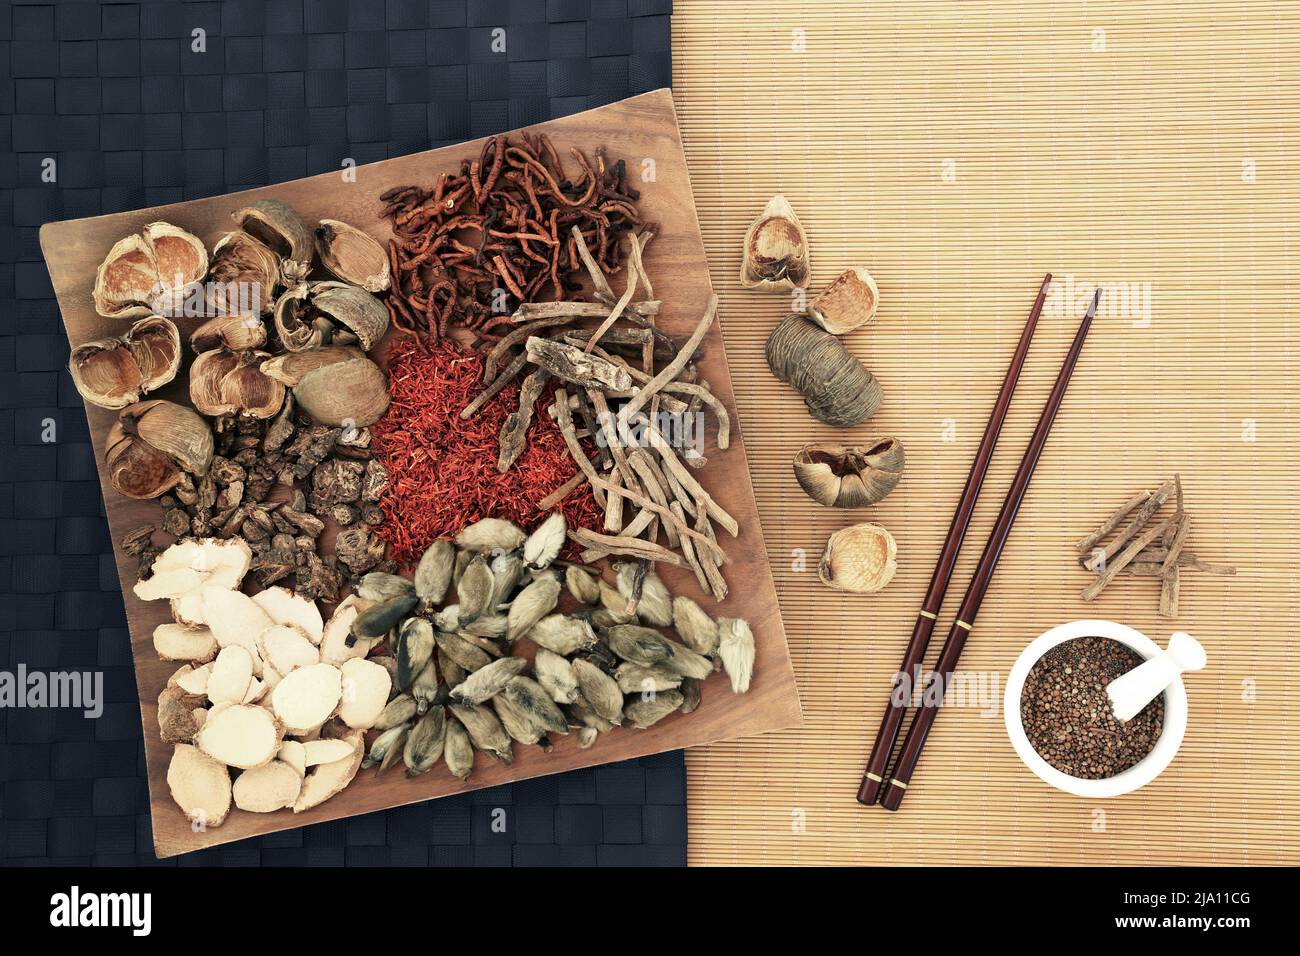 Traditional Chinese herbal plant medicine preparation with herbs and spice, chopsticks and mortar. Alternative natural holistic Asian healing remedy Stock Photo